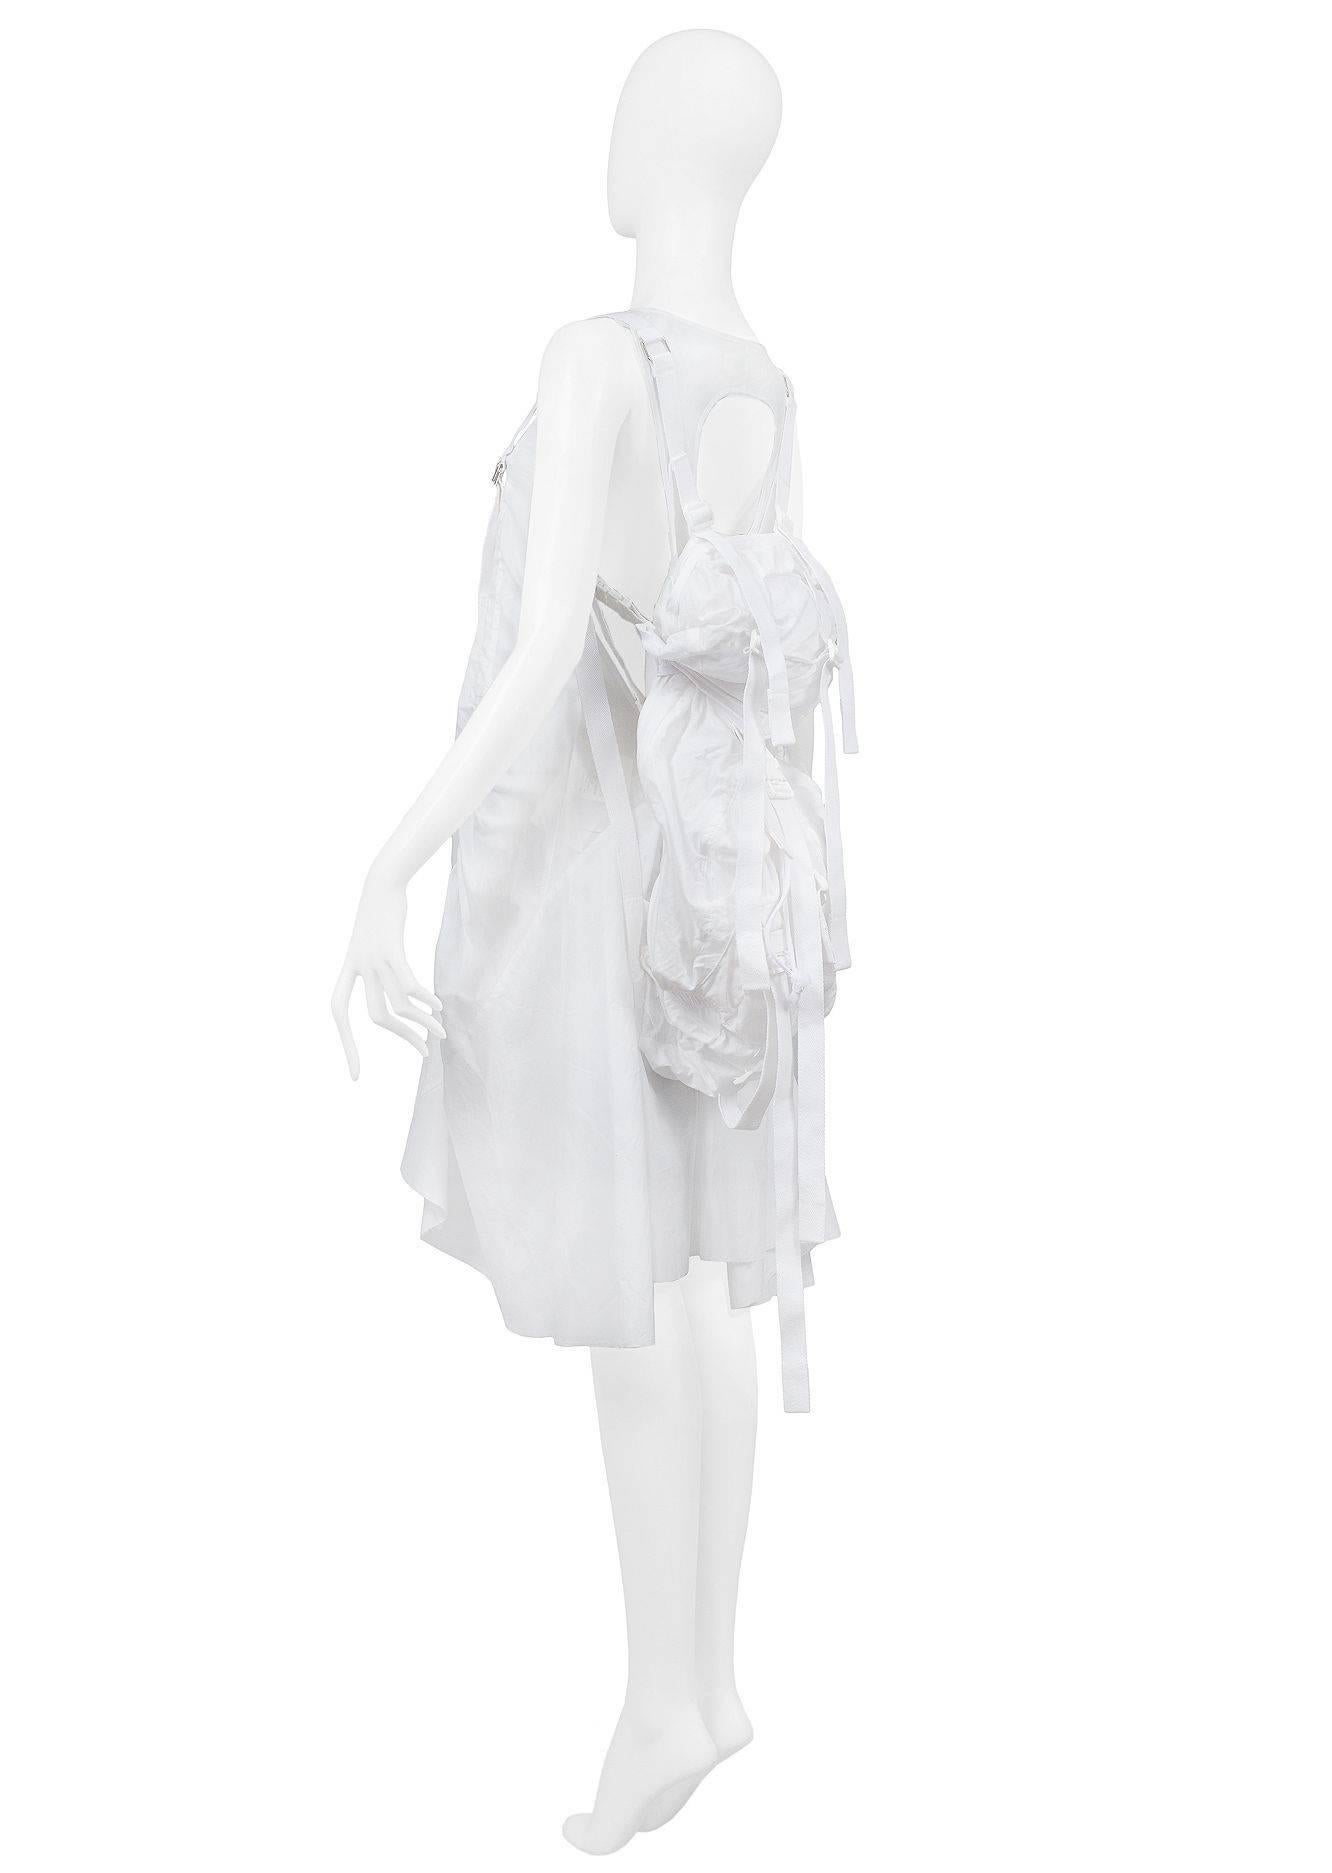 Resurrection Vintage is excited to offer an important vintage, Junya Watanabe, for Comme des Garcons white cotton parachute backpack dress. The dress features white parachute straps that adjust the dress's length, a scoop neckline, a keyhole open